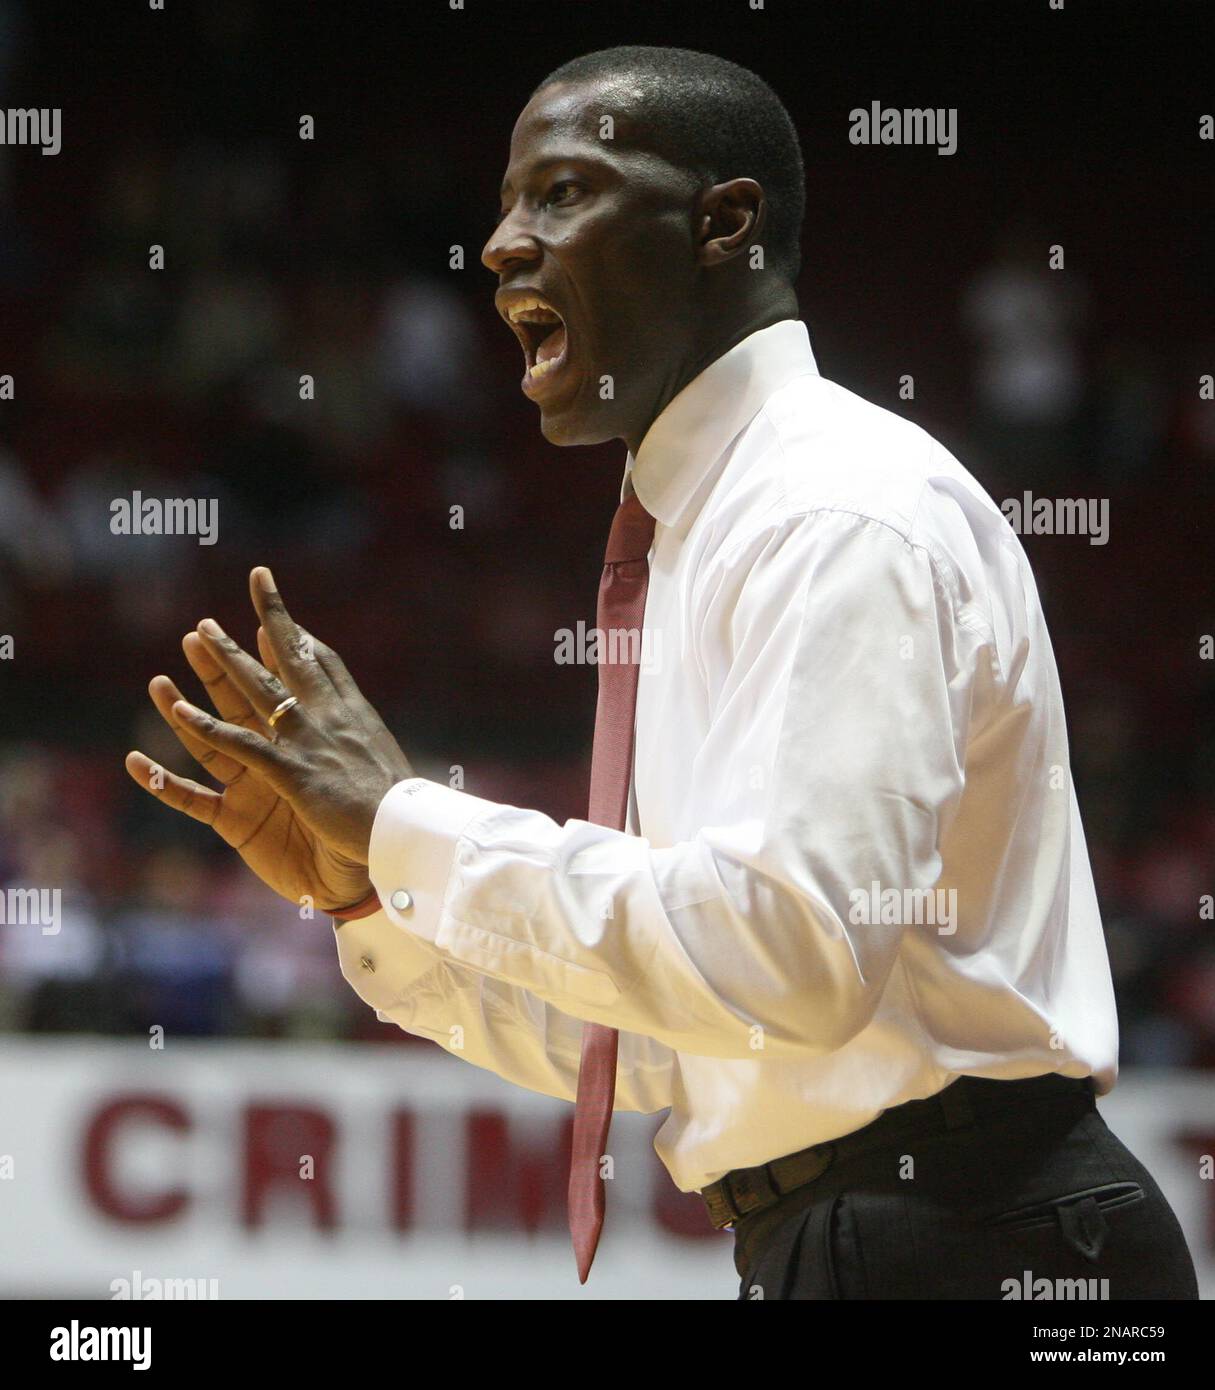 Alabama coach Anthony Grant looks on during the second half of an NCAA college basketball game against Virginia Commonwealth in Tuscaloosa, Ala., on Sunday, Nov. 27, 2011. (AP Photo/Robert Sutton) Stock Photo